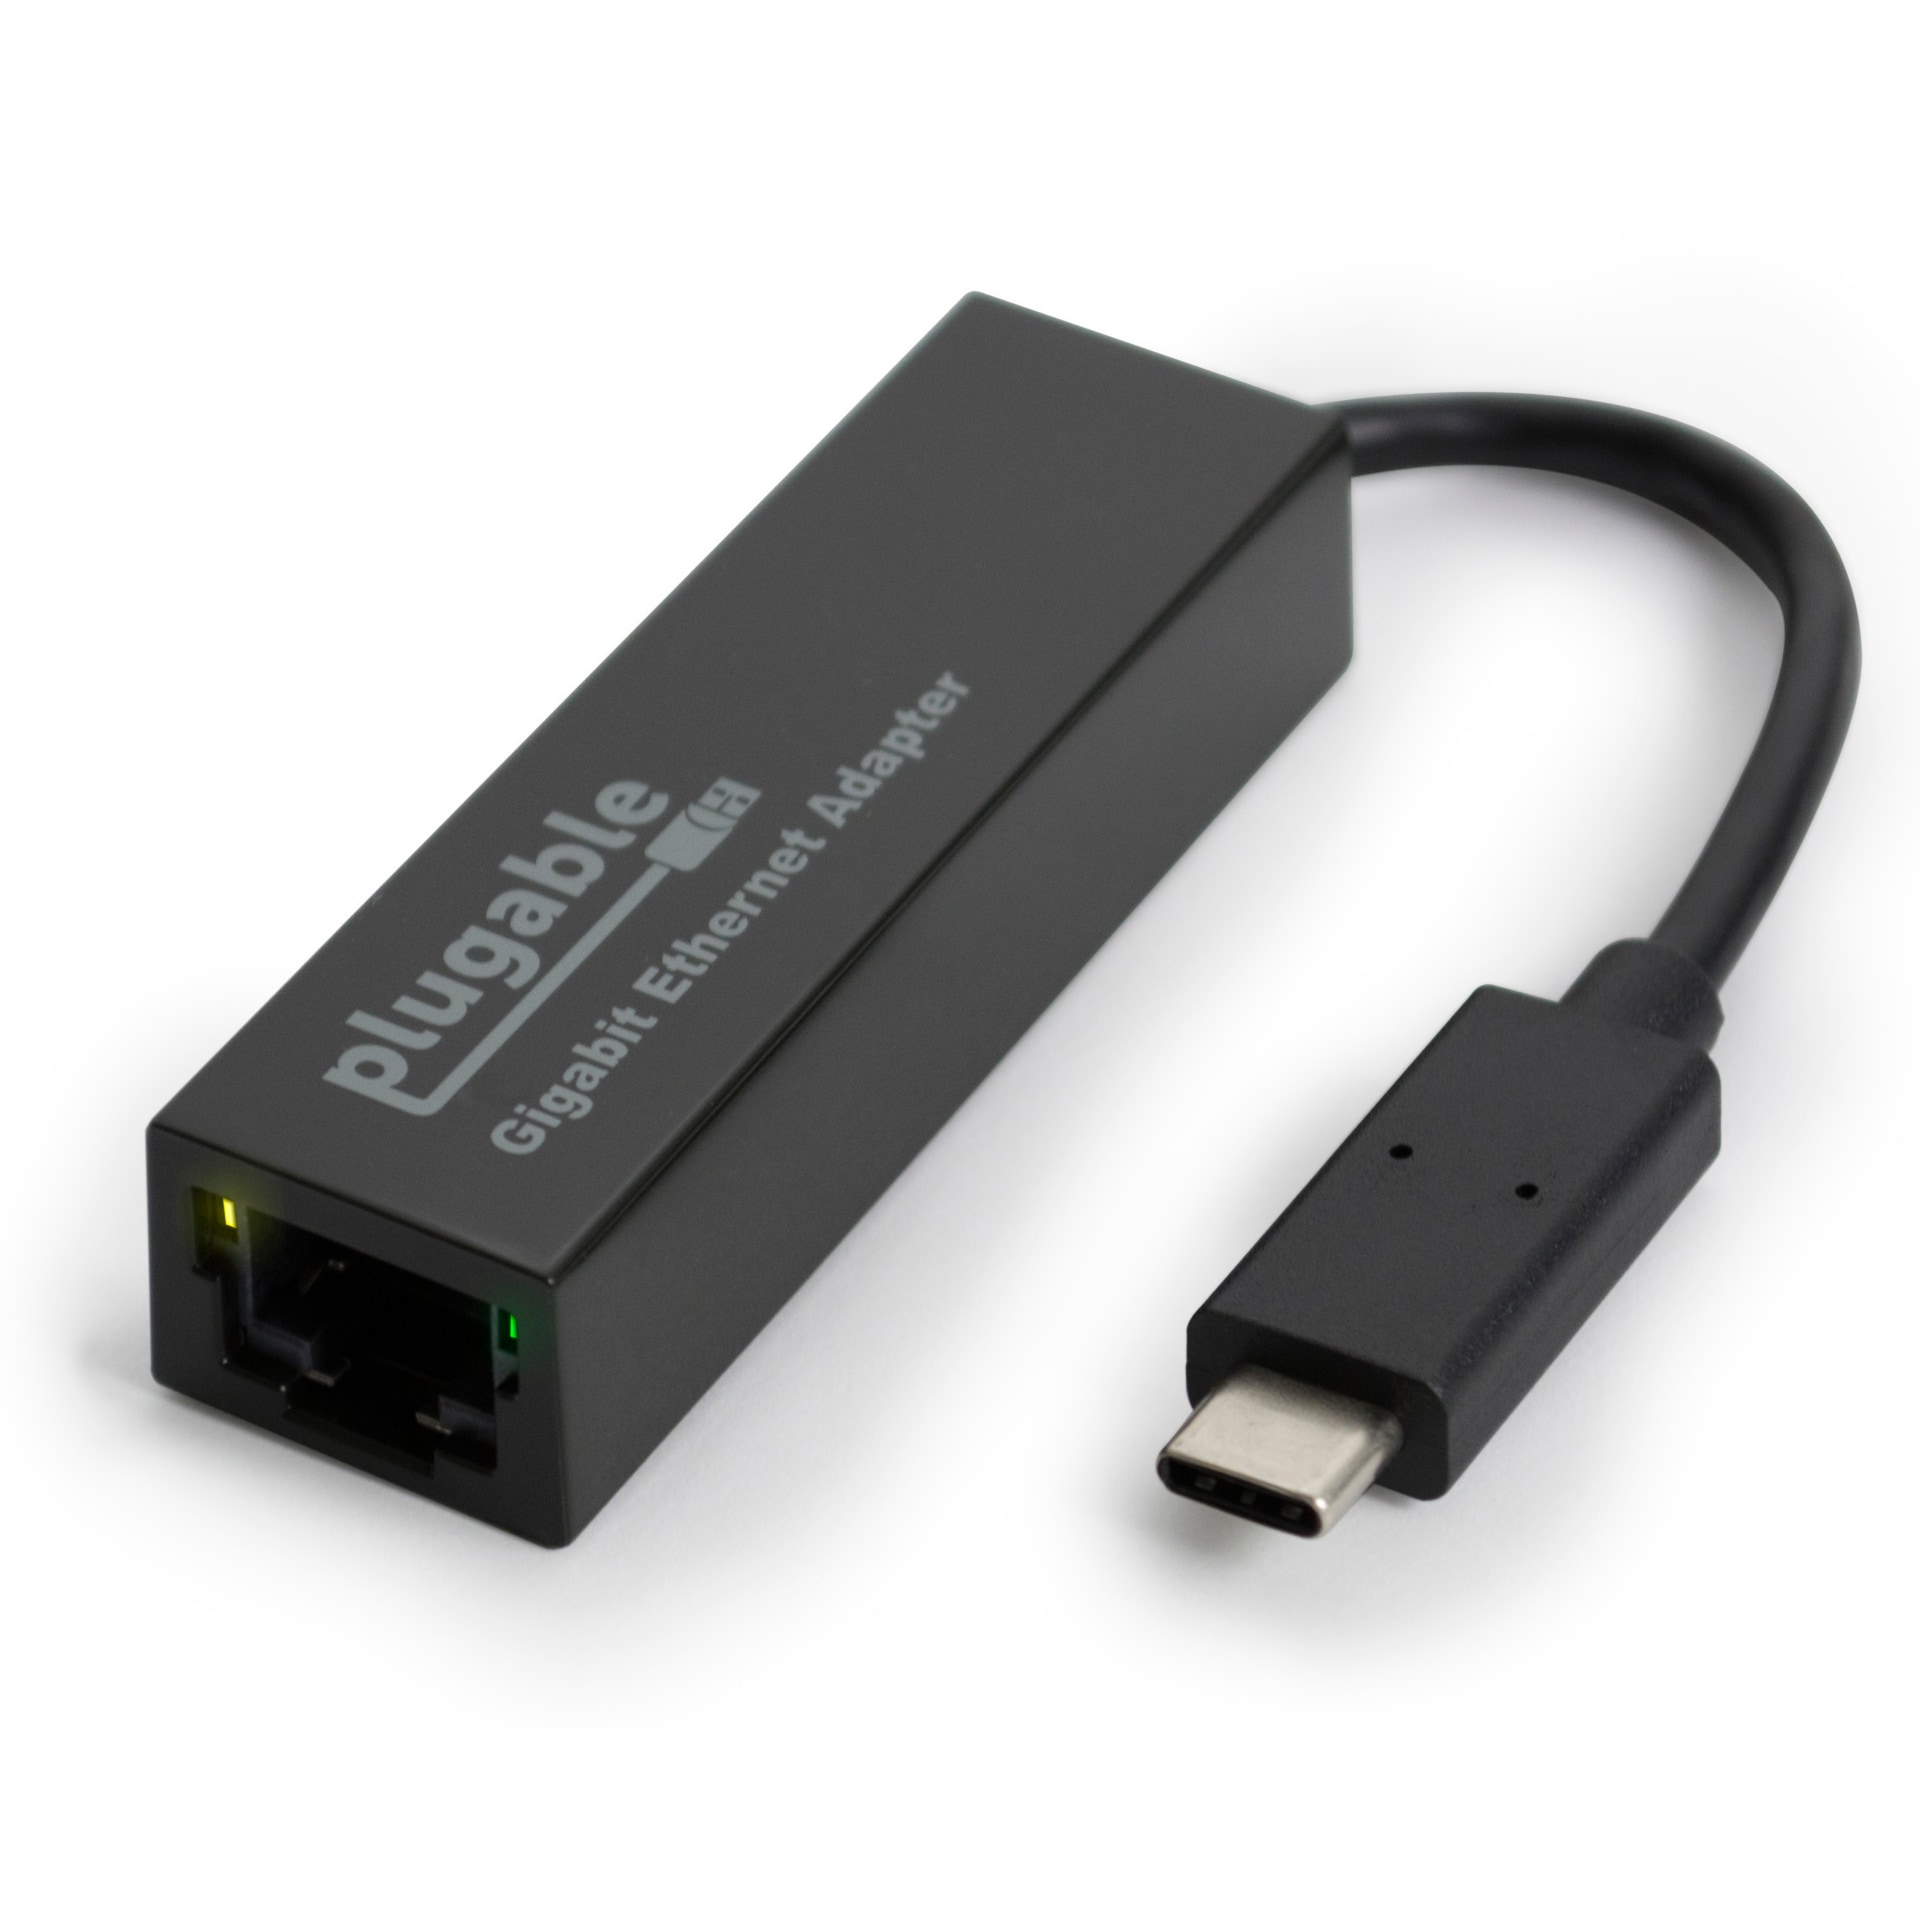 Plugable USB C Ethernet Adapter,Fast Reliable Gigabit Connection, Windows 10,8.1,7,Linux,Chrome OS,Dell XPS,HP,Lenovo